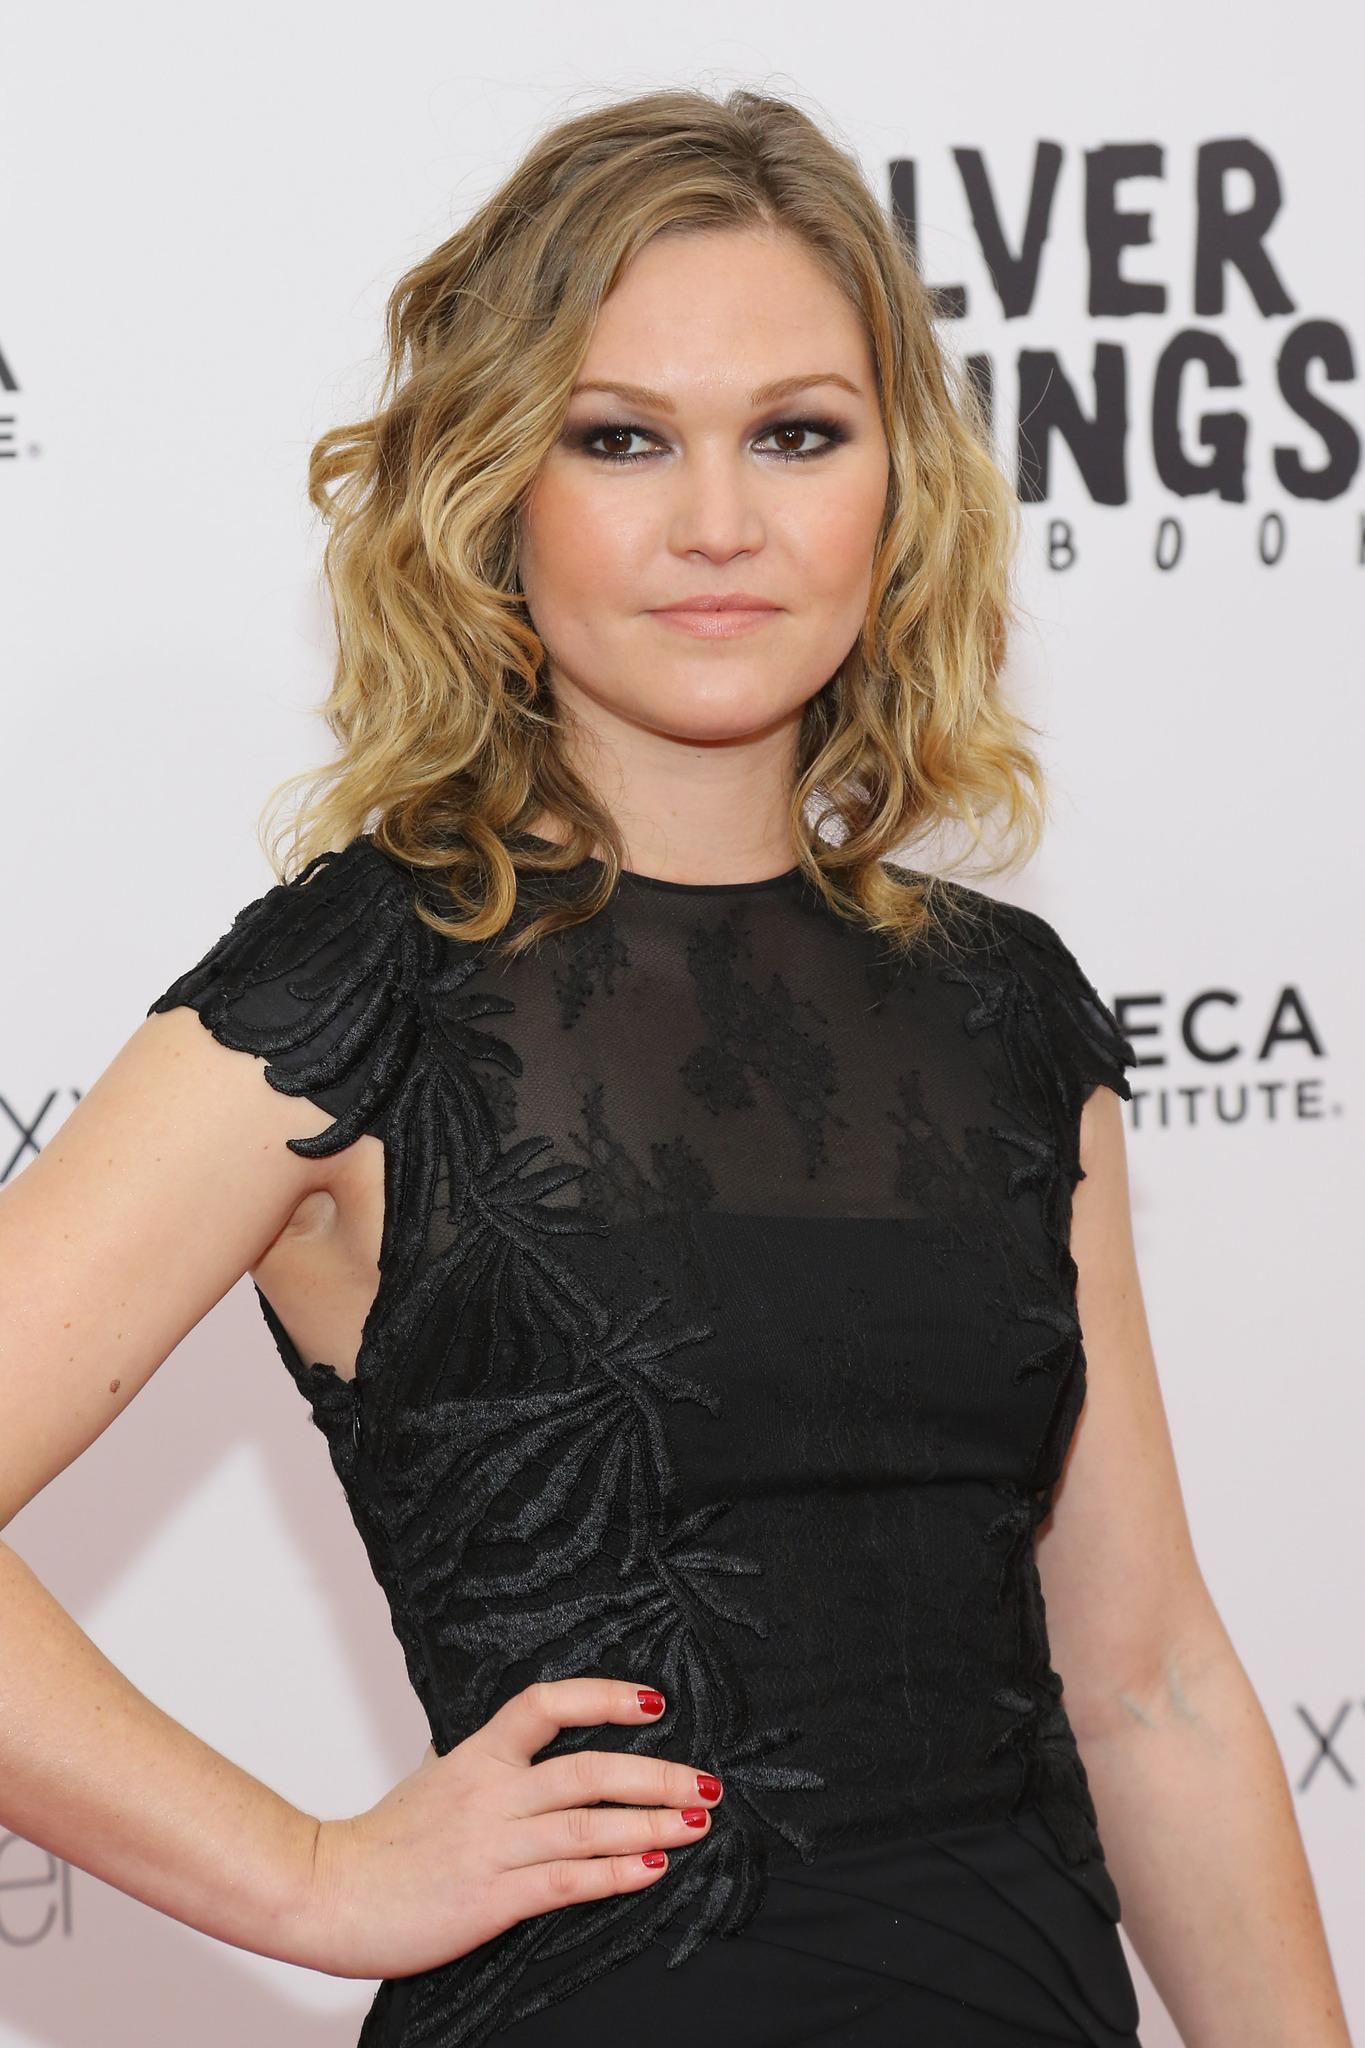 Julia Stiles at the Silver Linings Playbook Premiere